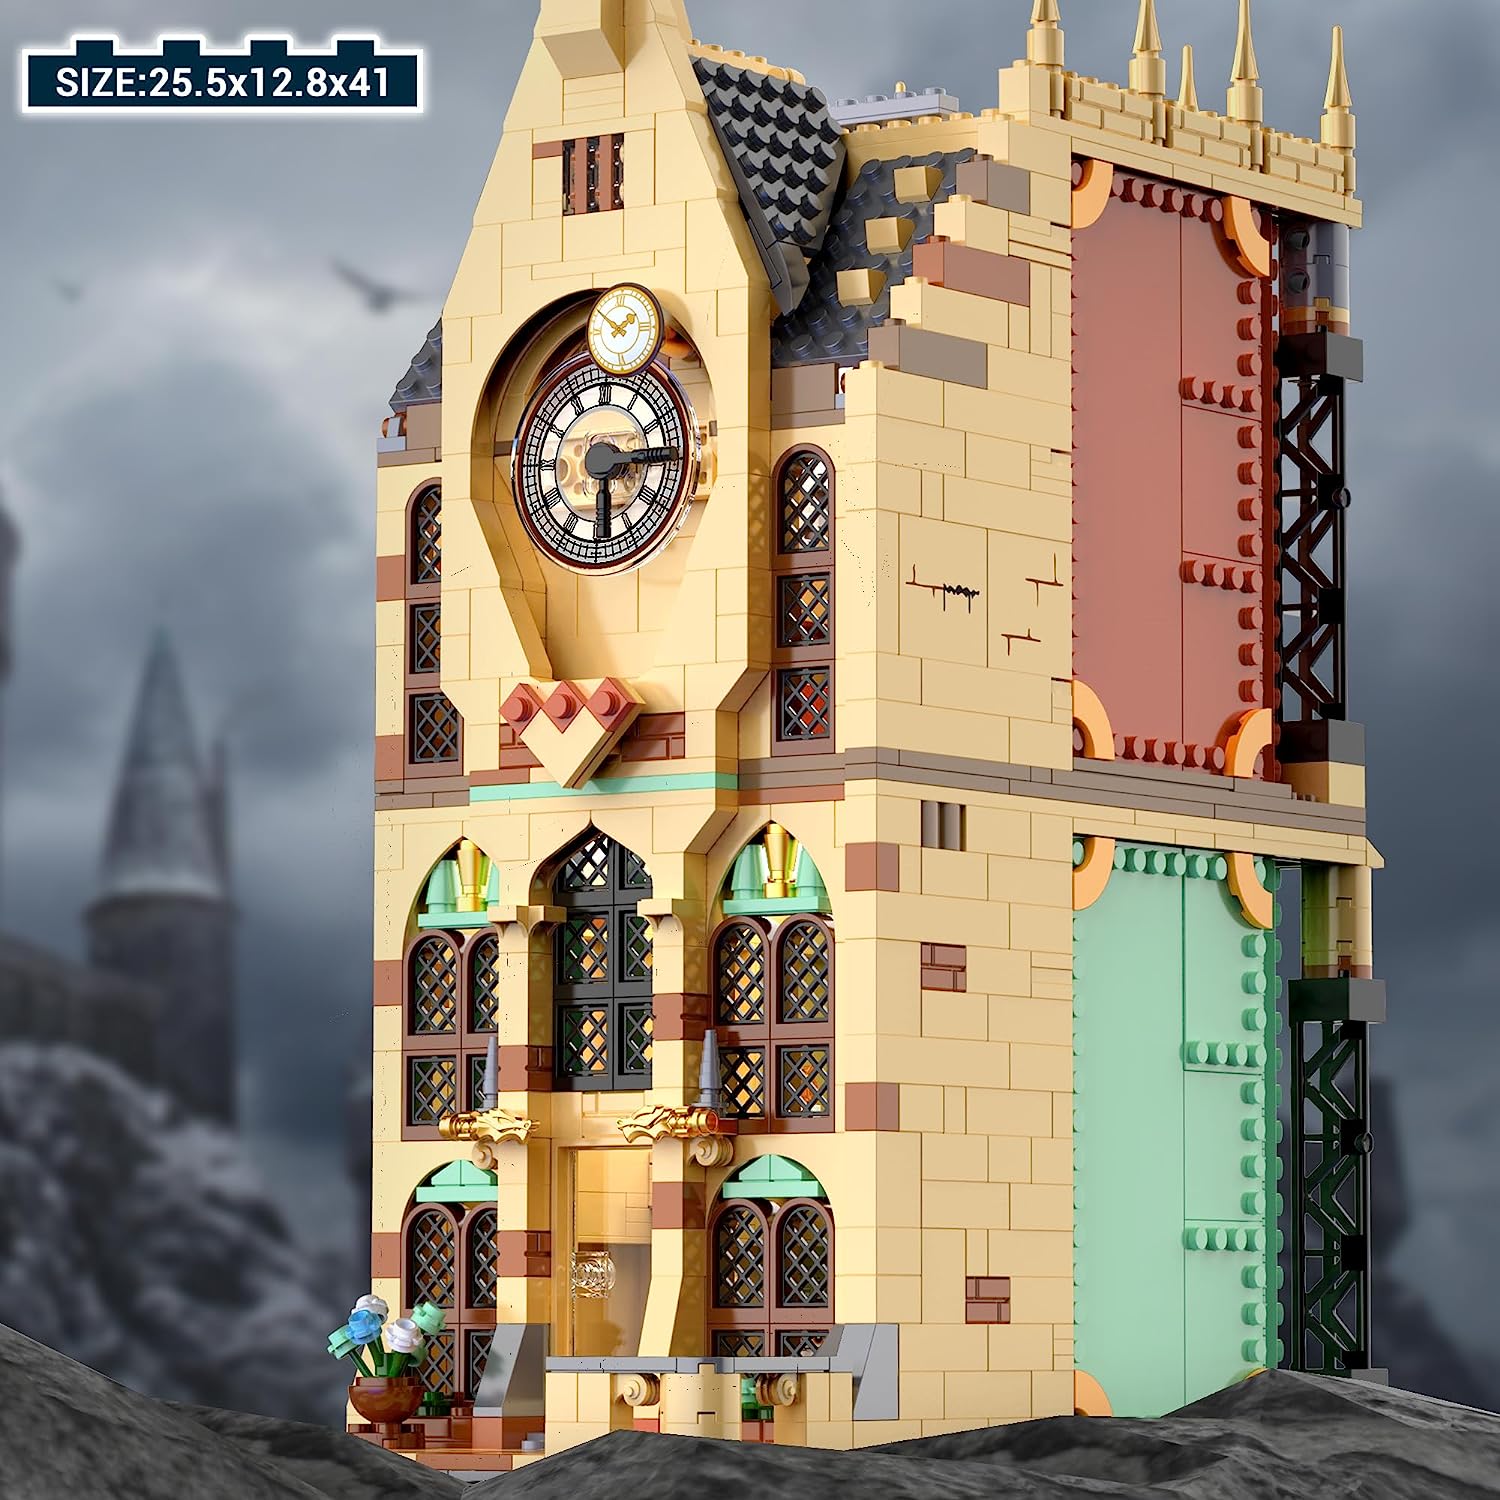 Harry Castle Potter Toys Building Sets, Clock Tower Playset for Boys &  Girls Toys Age 8-10, Best Collectible Birthday Gift Idea for Kids Aged 8  and up